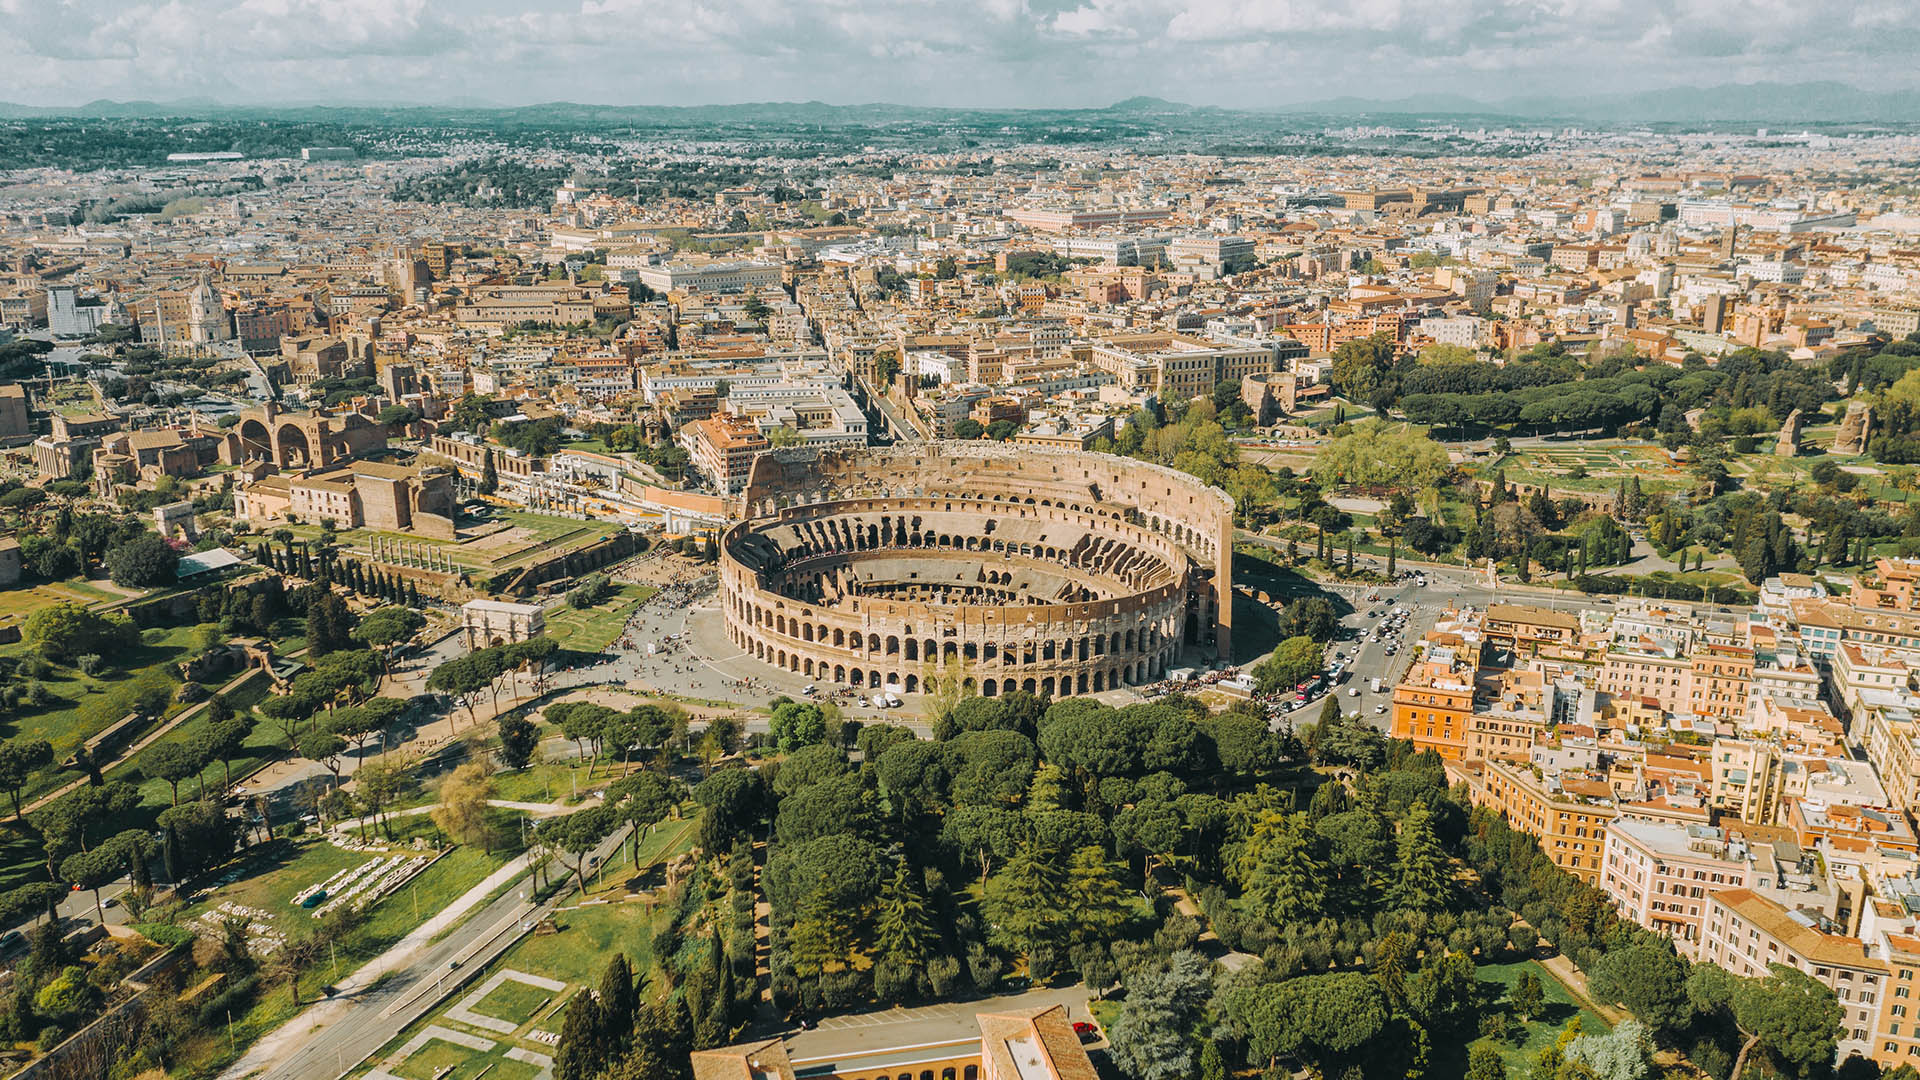 Aerial view of the Colosseum and Roman Forum in Rome